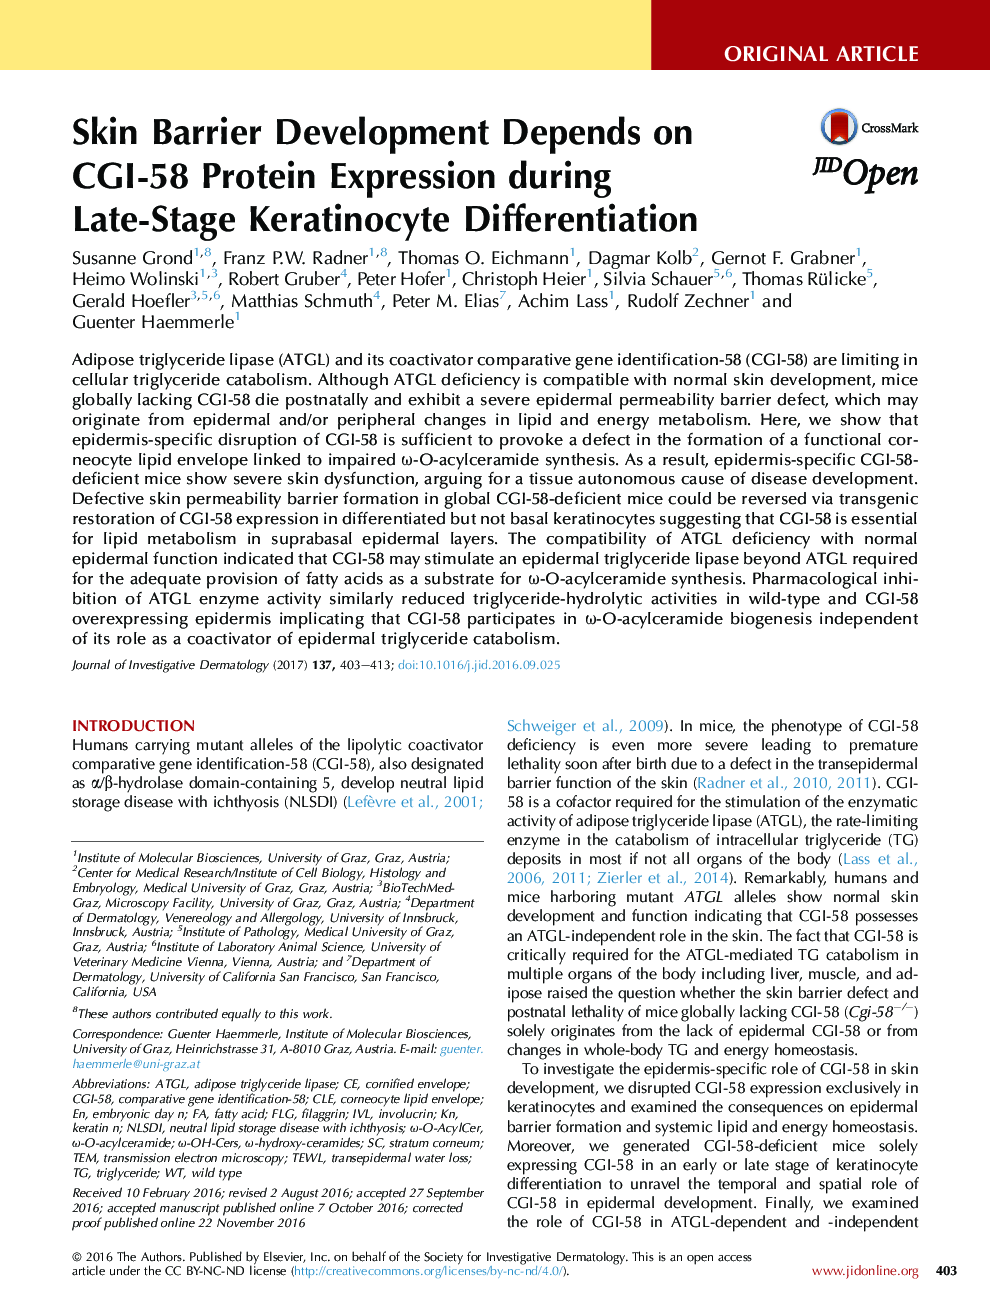 Skin Barrier Development Depends on CGI-58 Protein Expression during Late-Stage Keratinocyte Differentiation